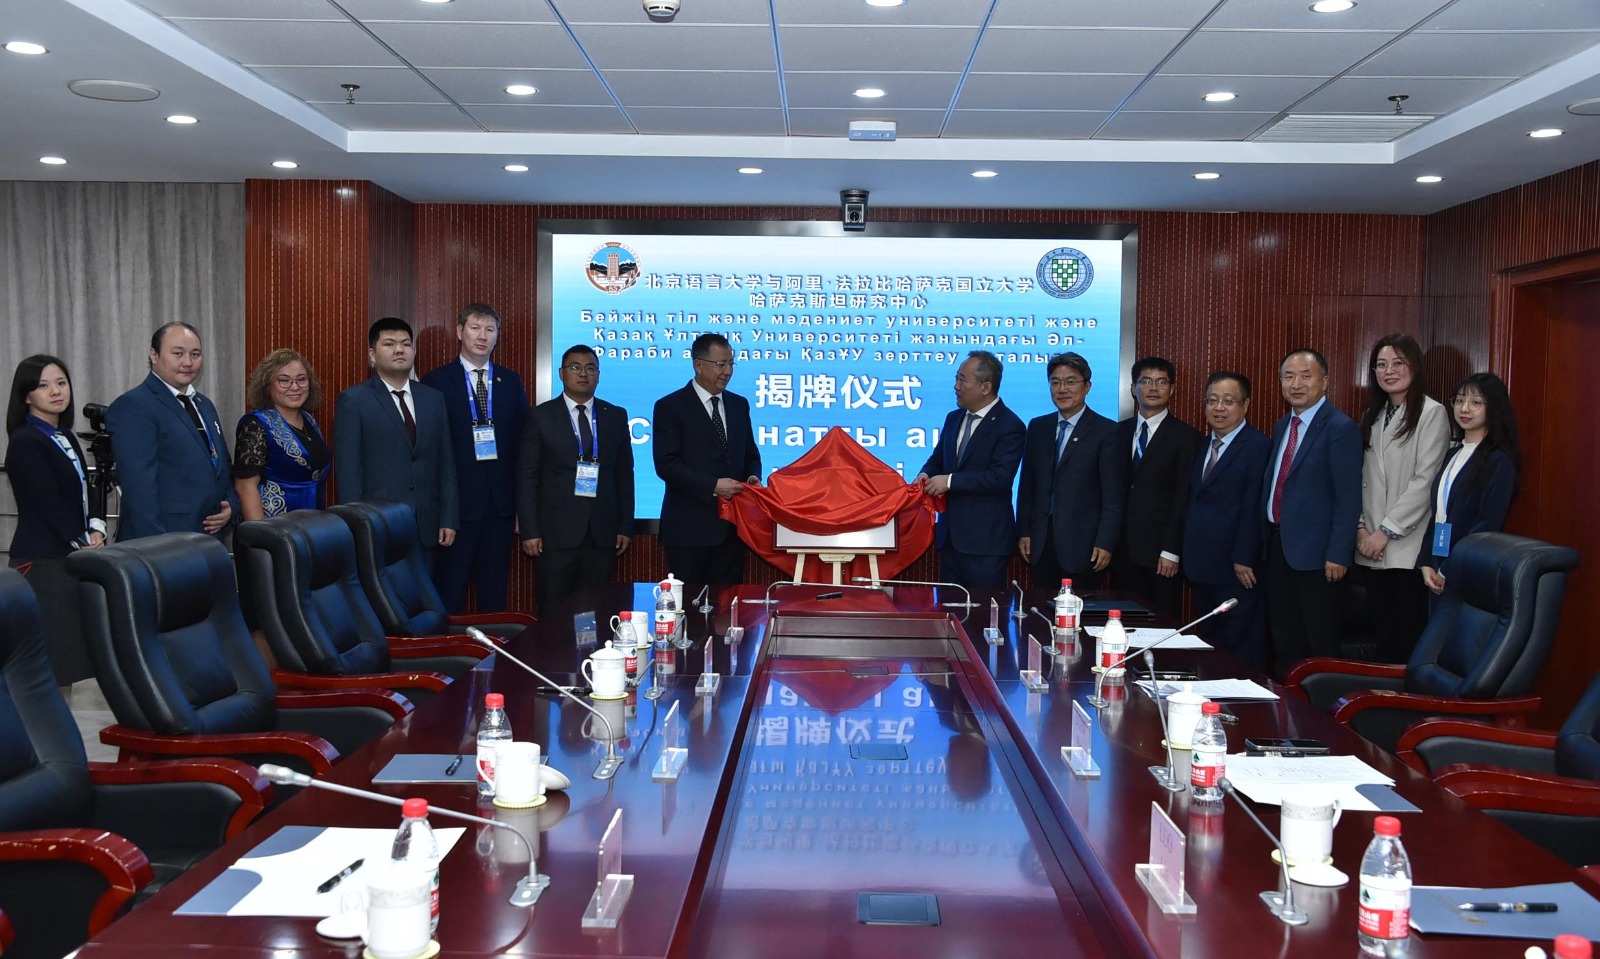 Rector held a number of meetings with the heads of Chinese universities